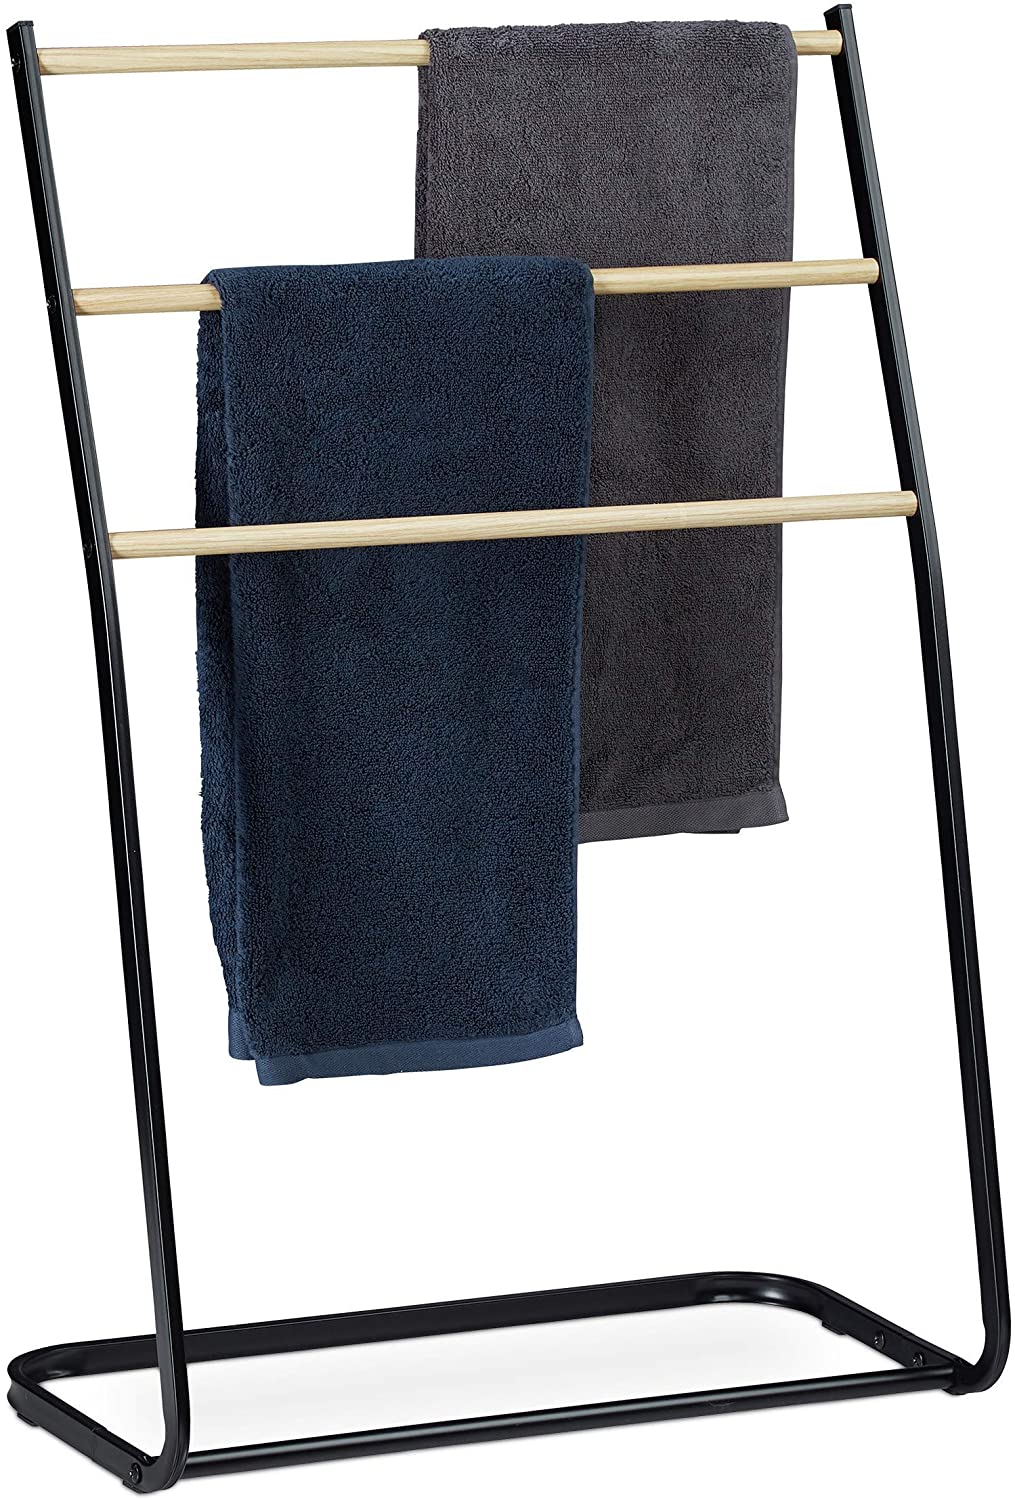 Relaxdays Standing Towel Rail Metal 3 Rungs Wood Effect For Towels And Clot